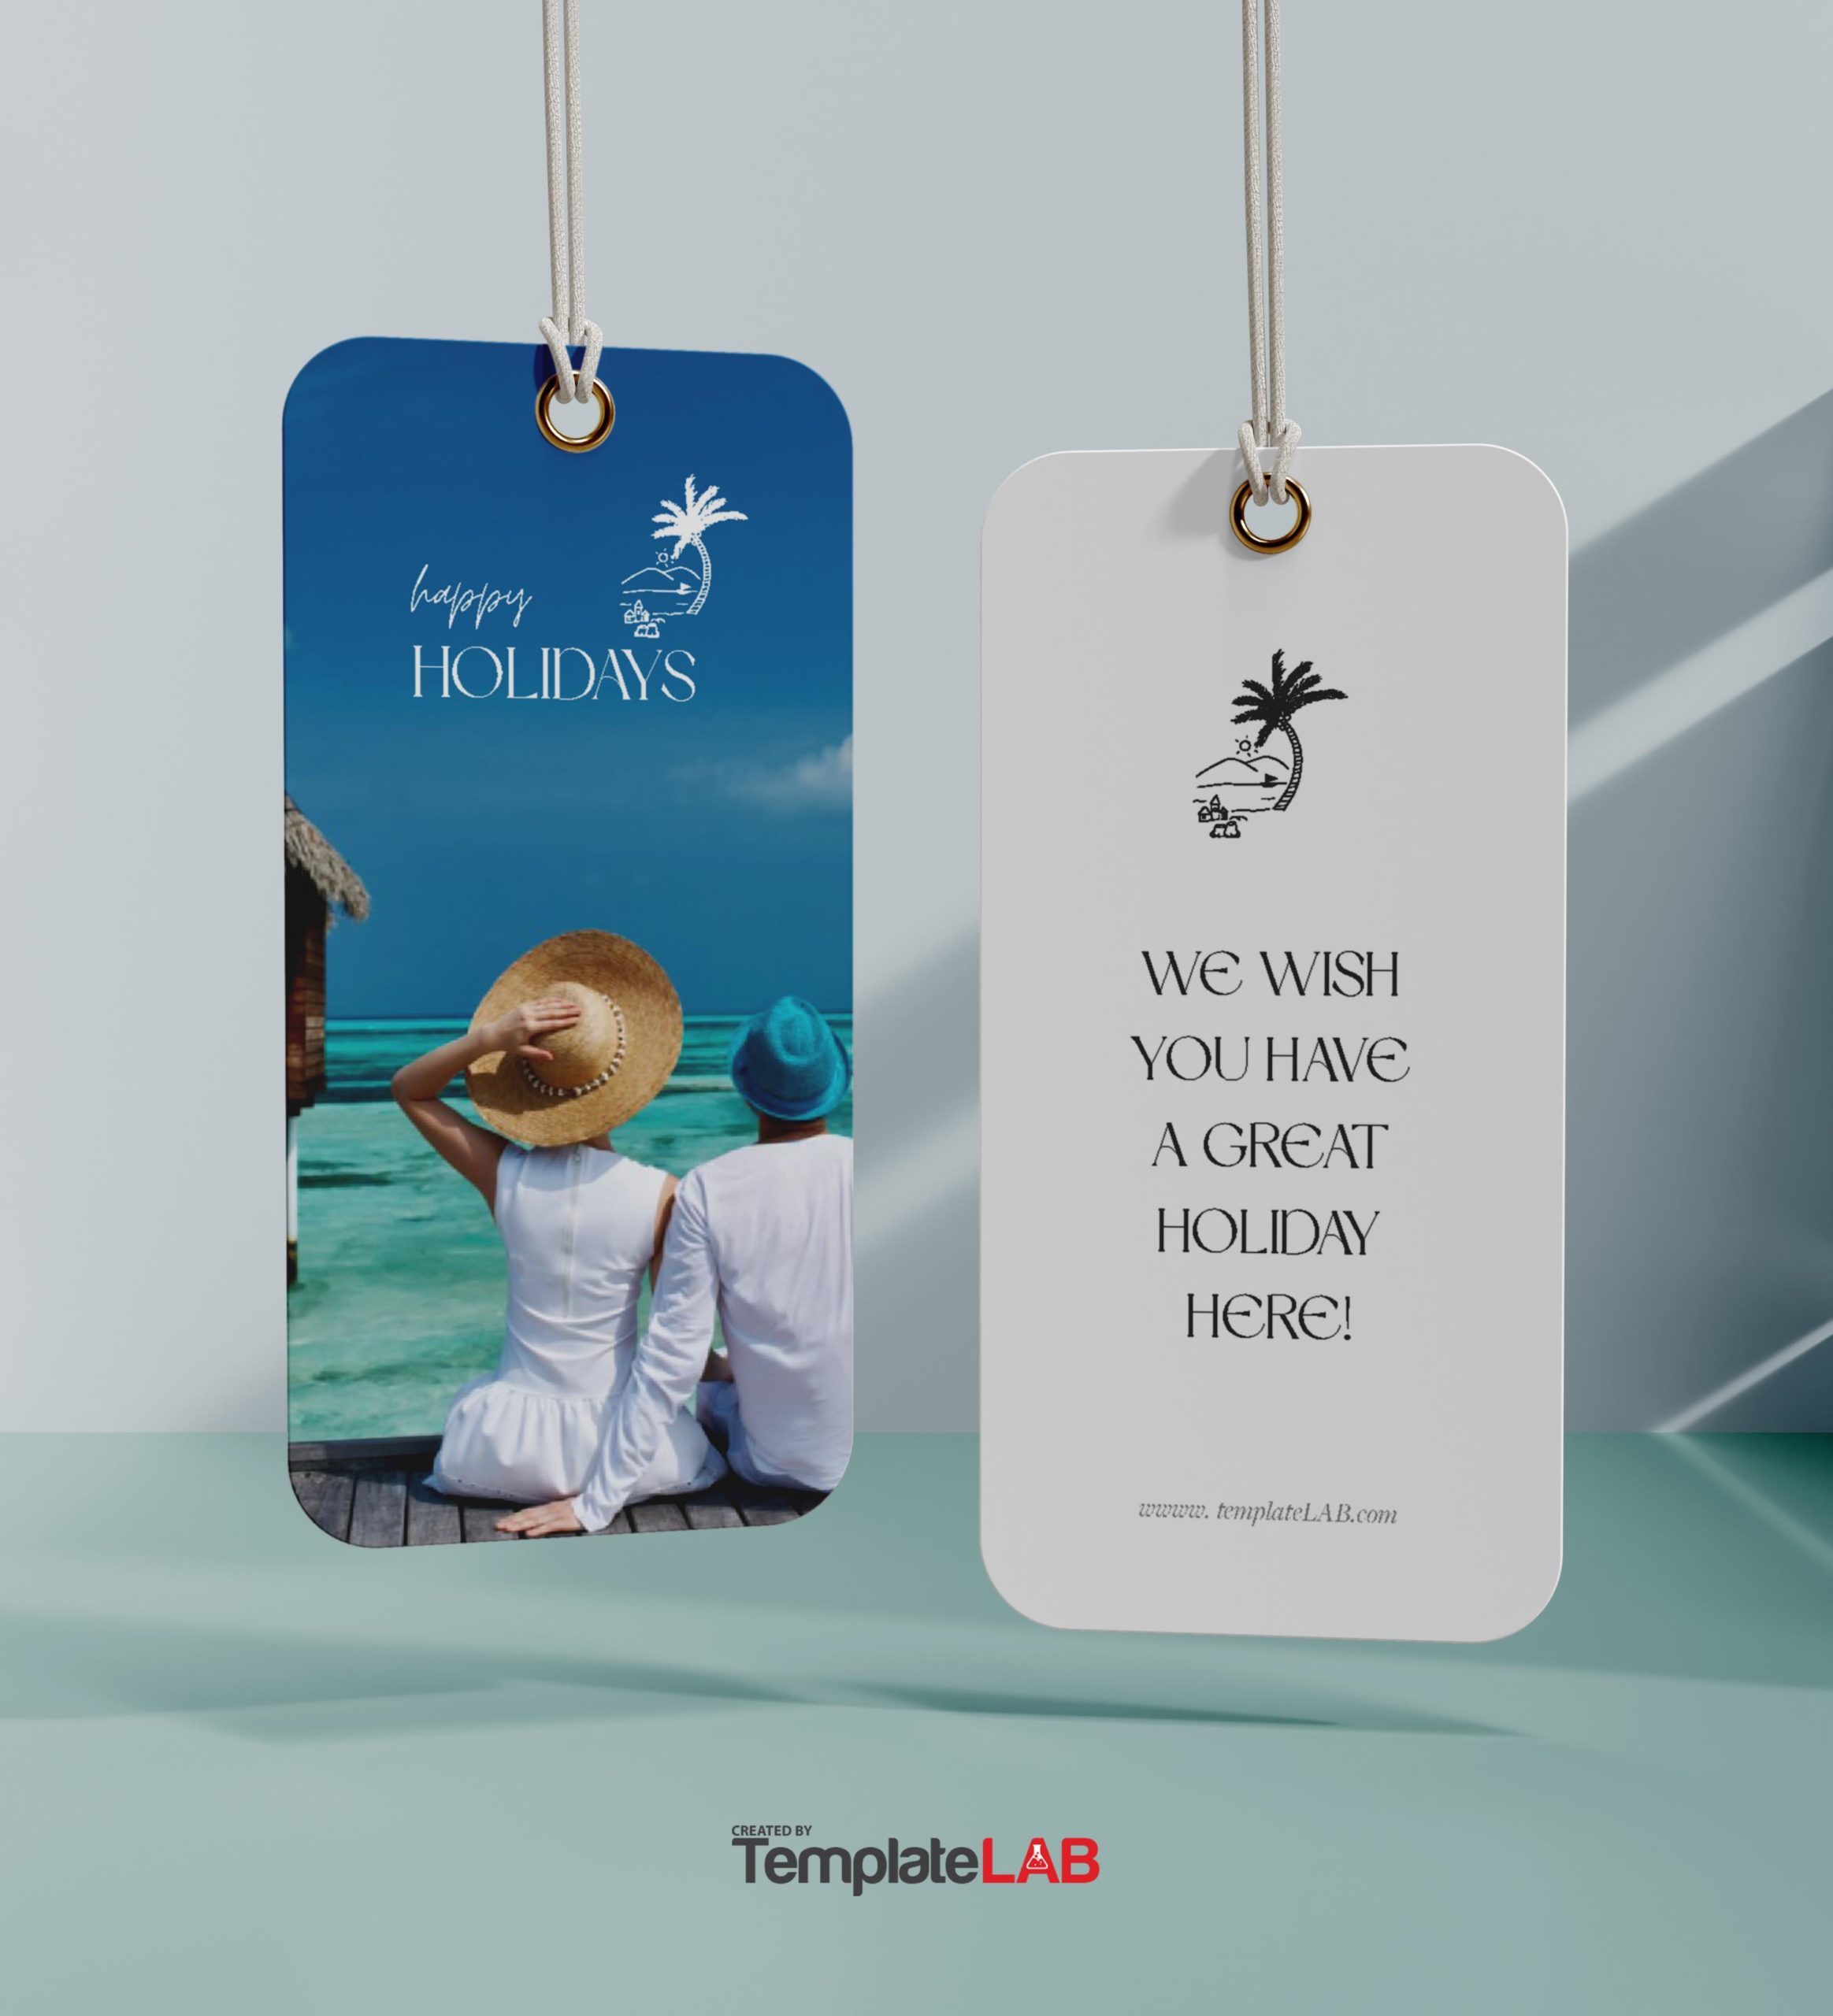 Free Holiday Gift Tags